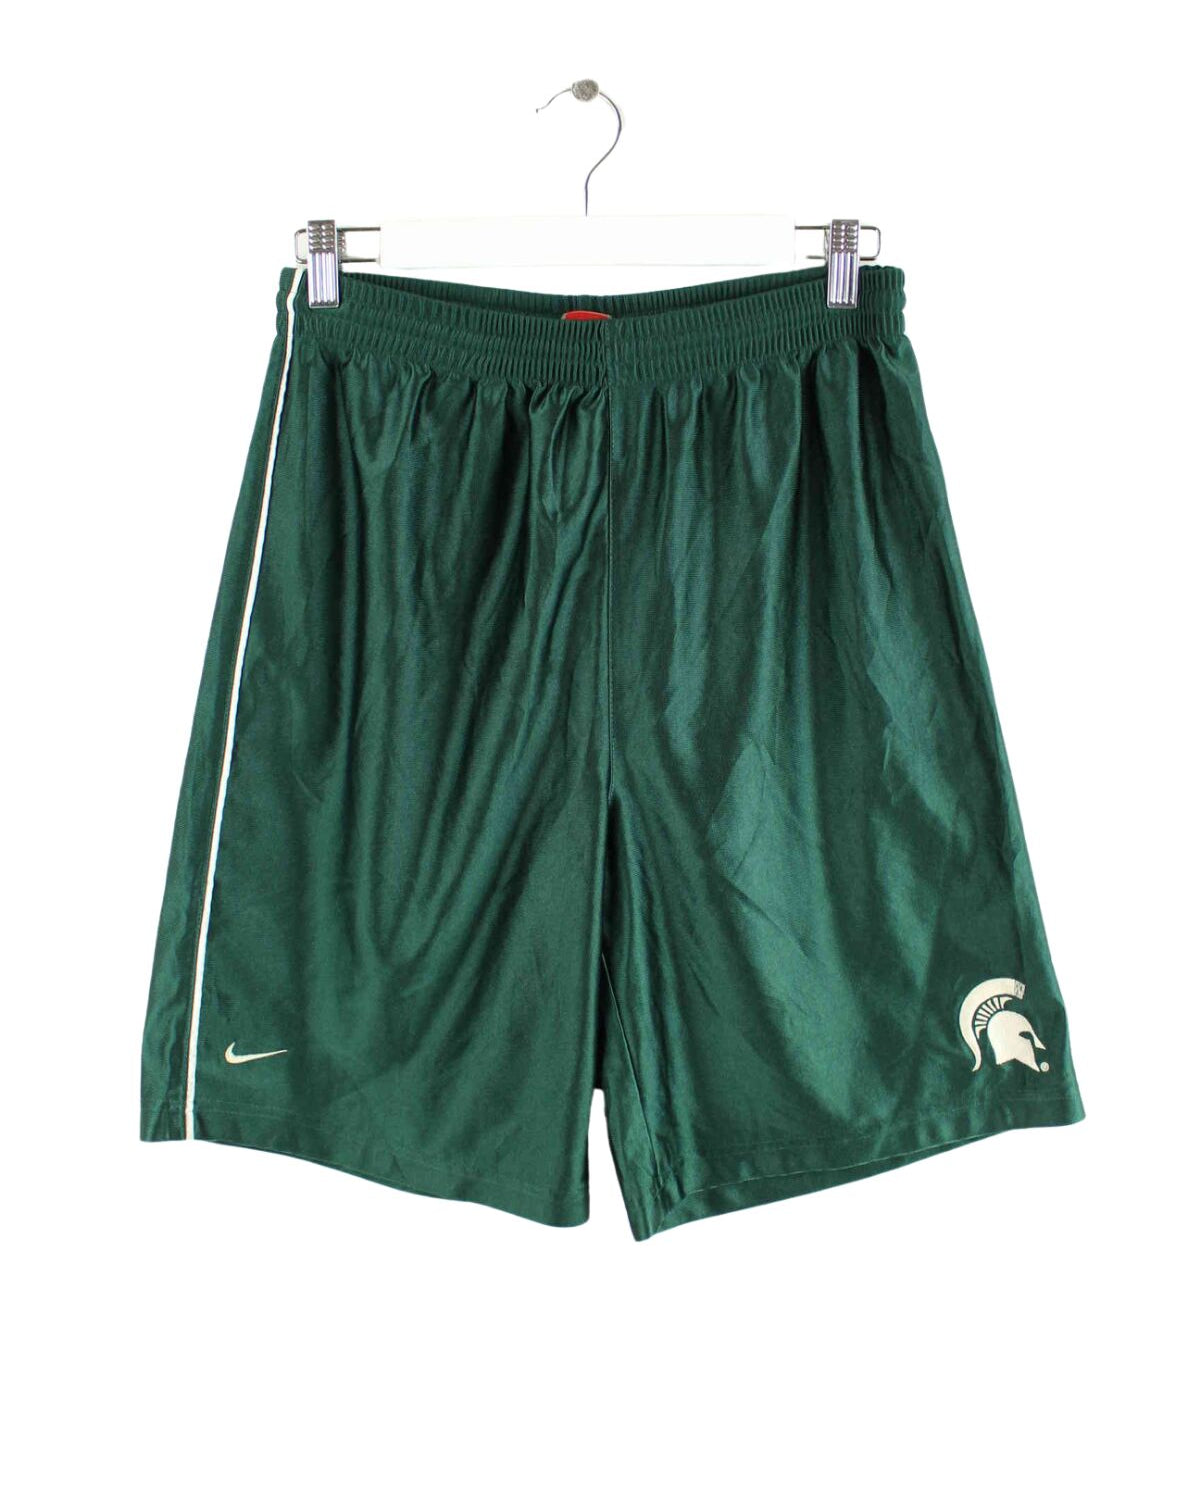 Nike y2k Spartans Embroidered Shorts Grün XL (front image)